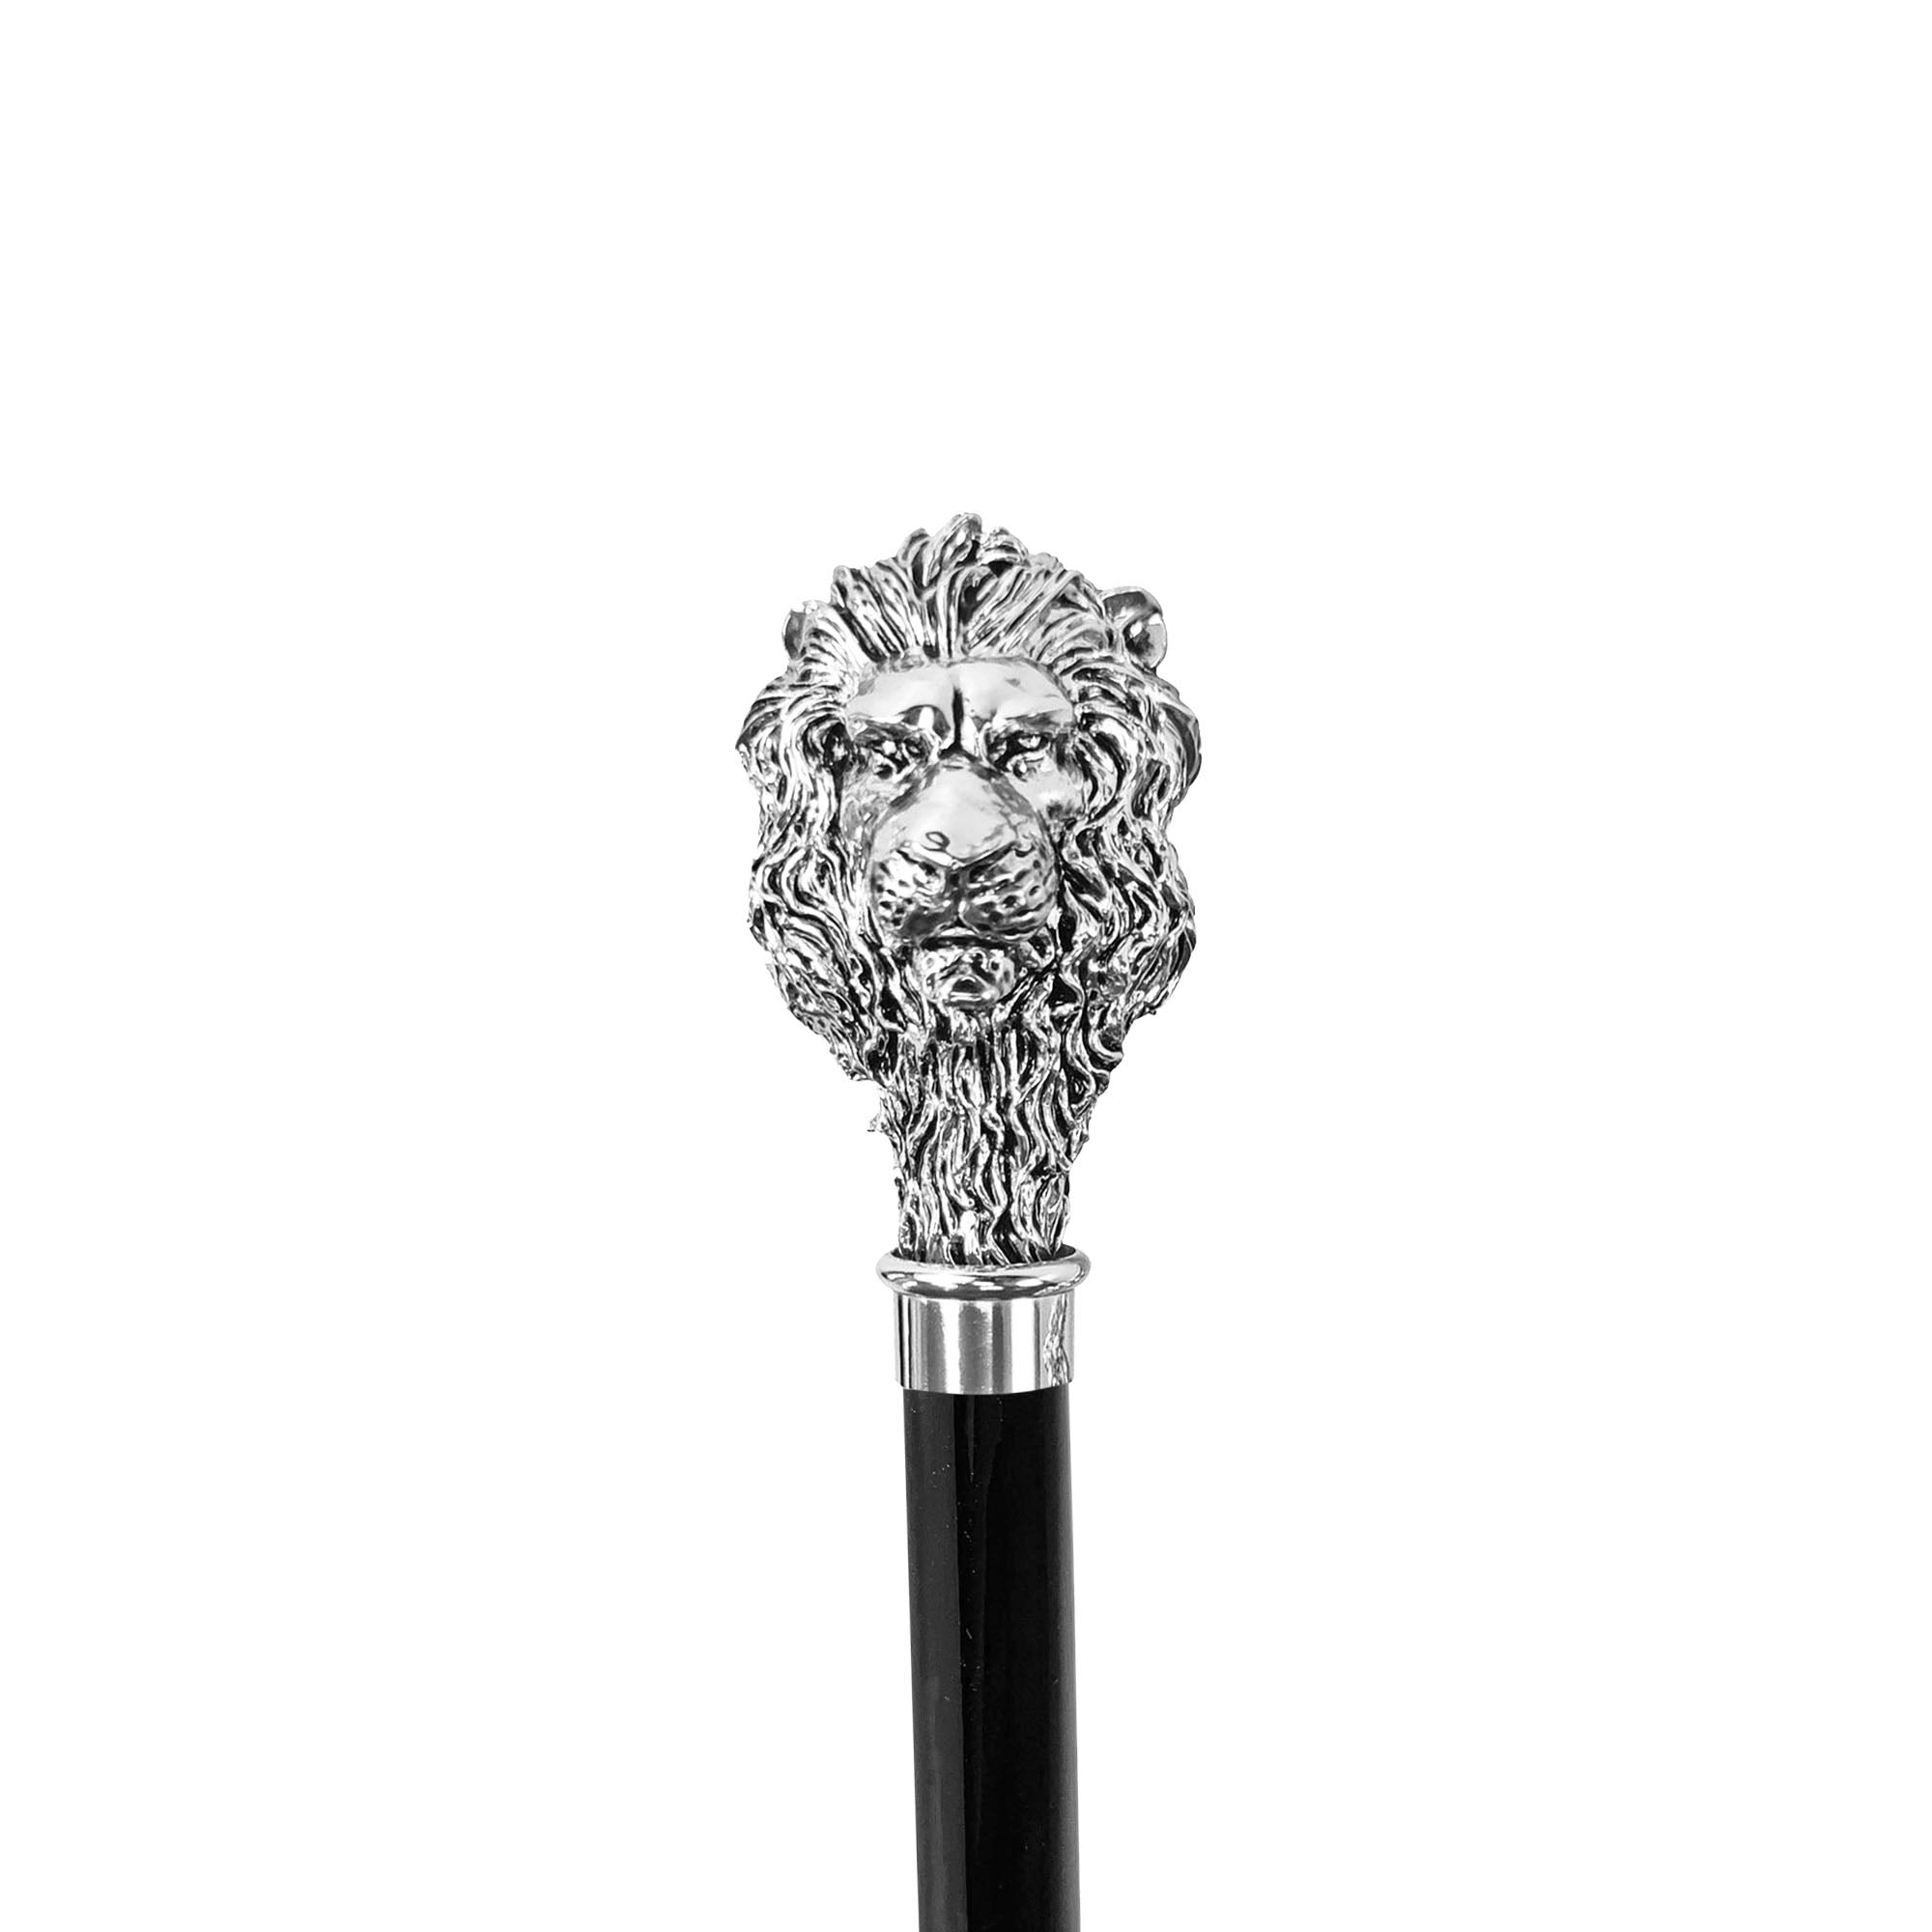 Fantastic Black umbrella for man with Silverplated Lion